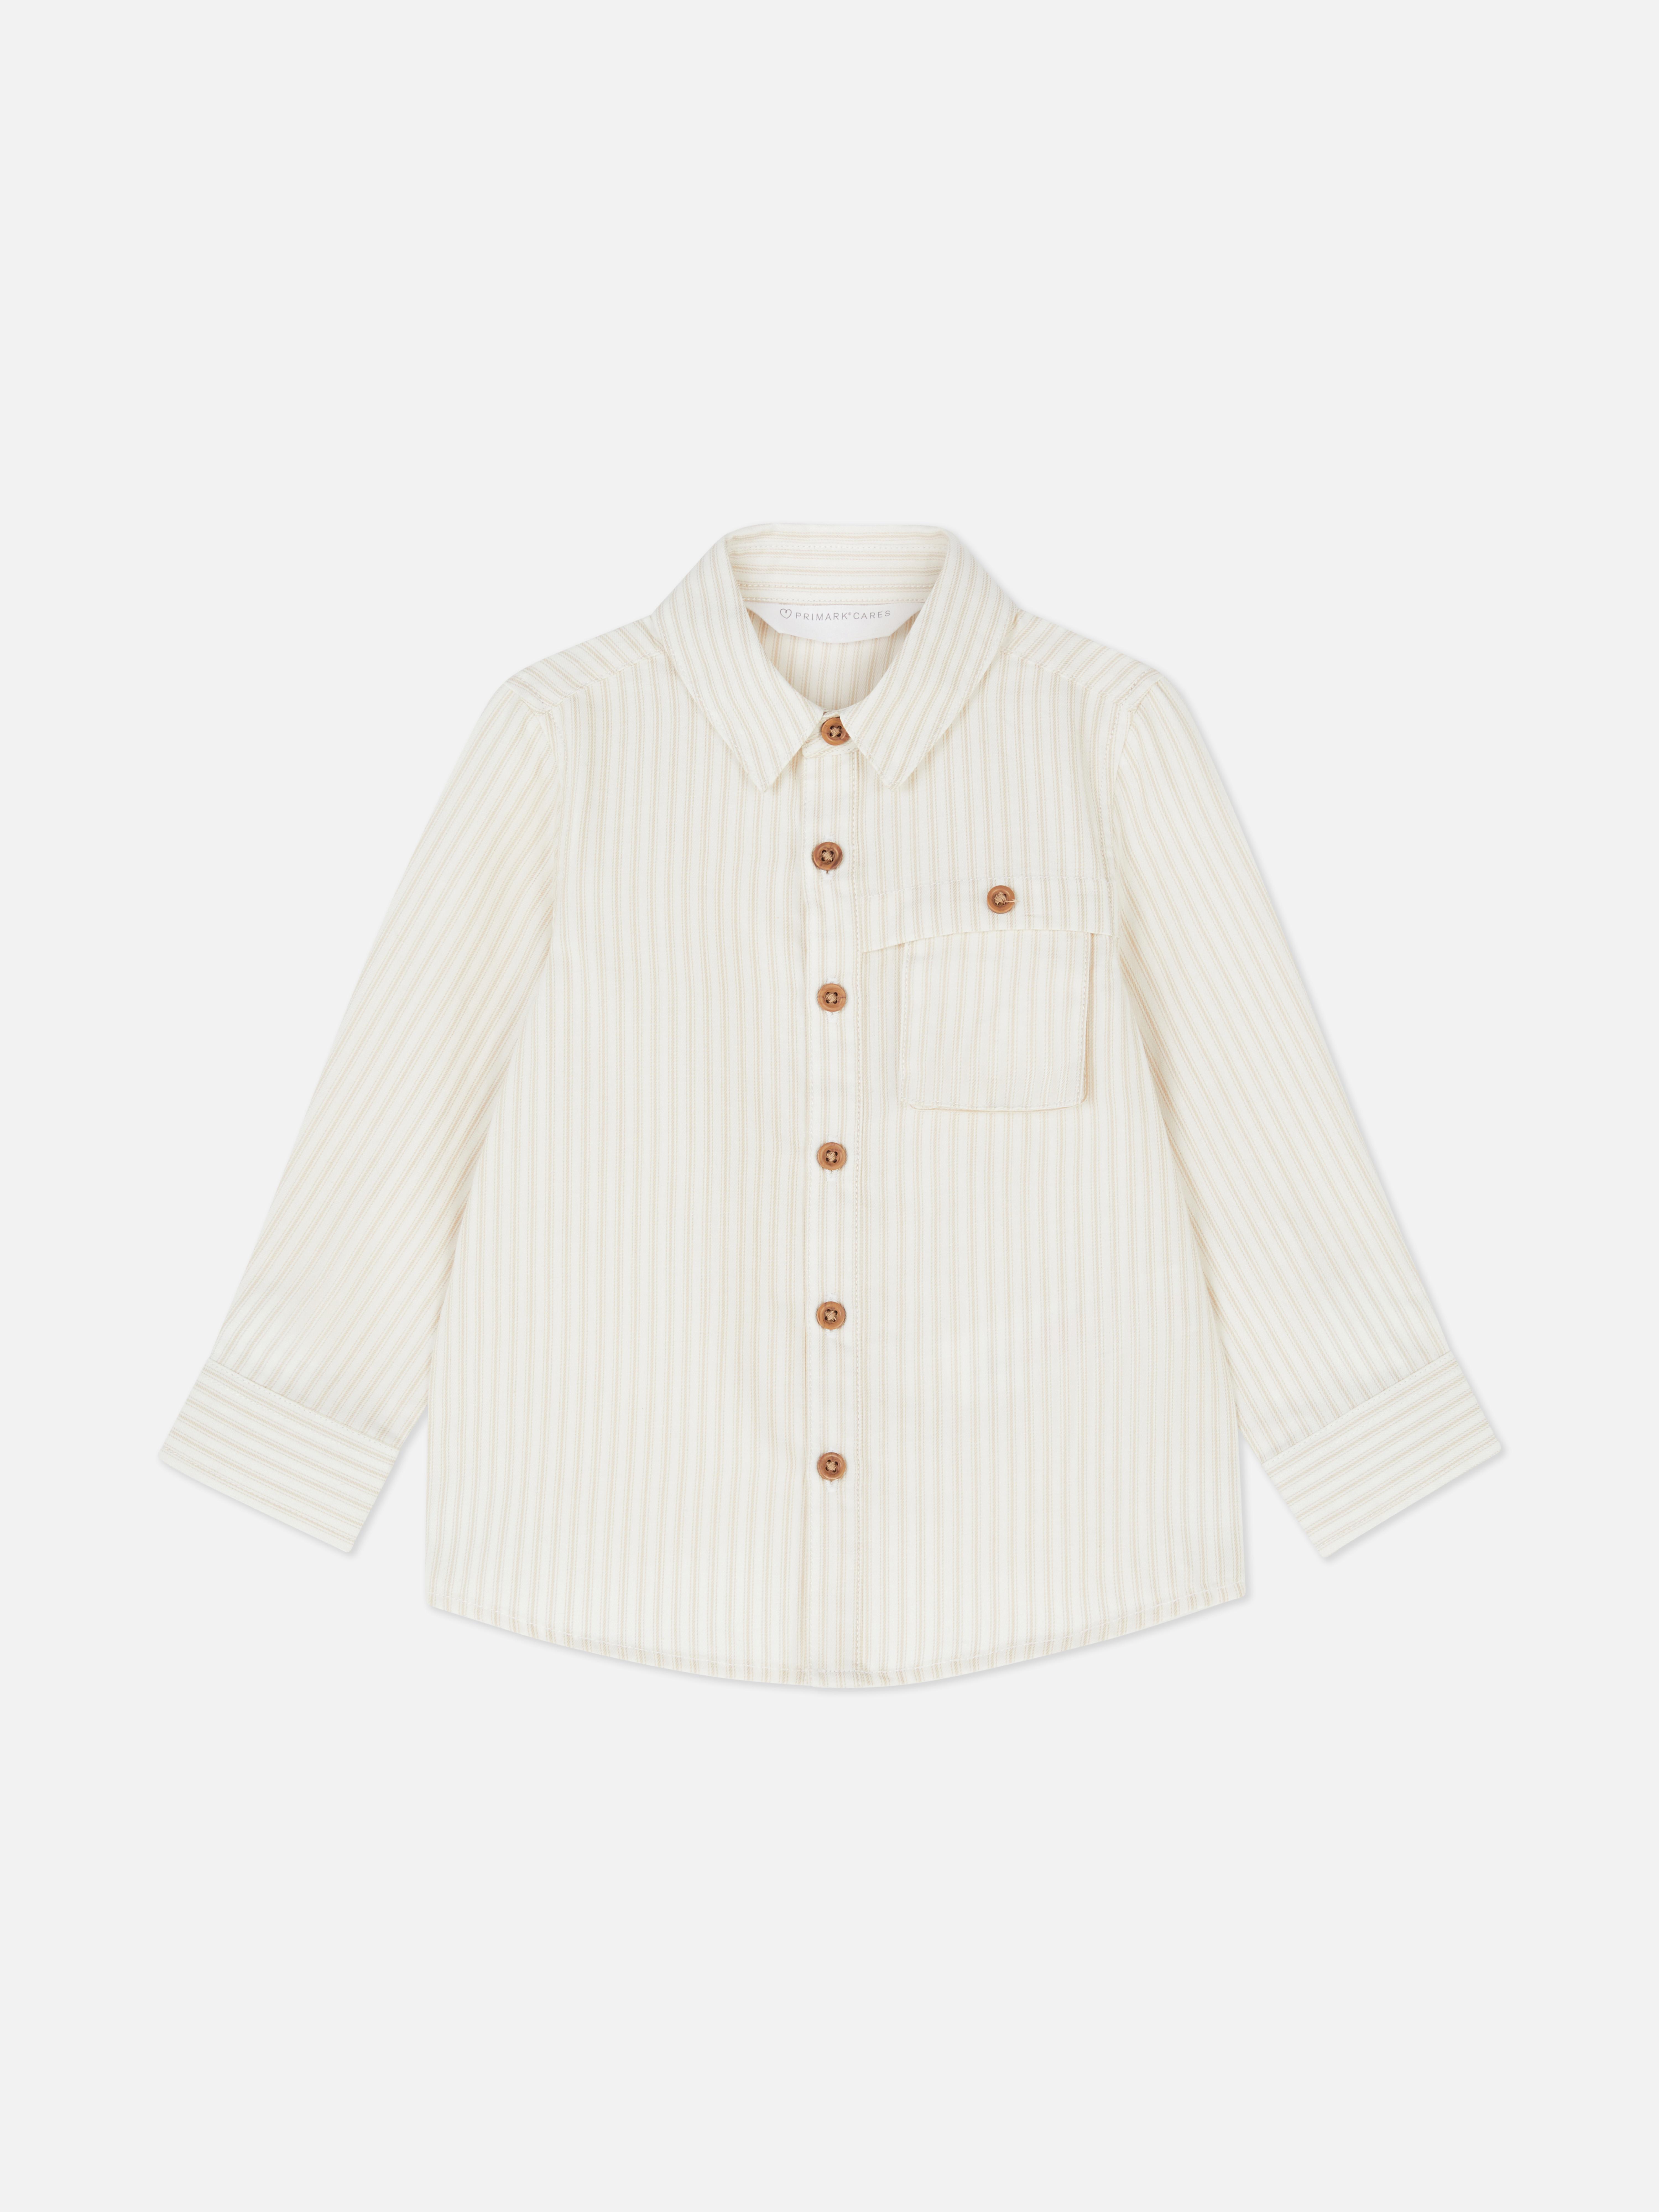 PRIMARK CHILDREN'S WHITE Long Sleeve Thermal Cotton Top11/12 Years+ West  13/14 £6.80 - PicClick UK